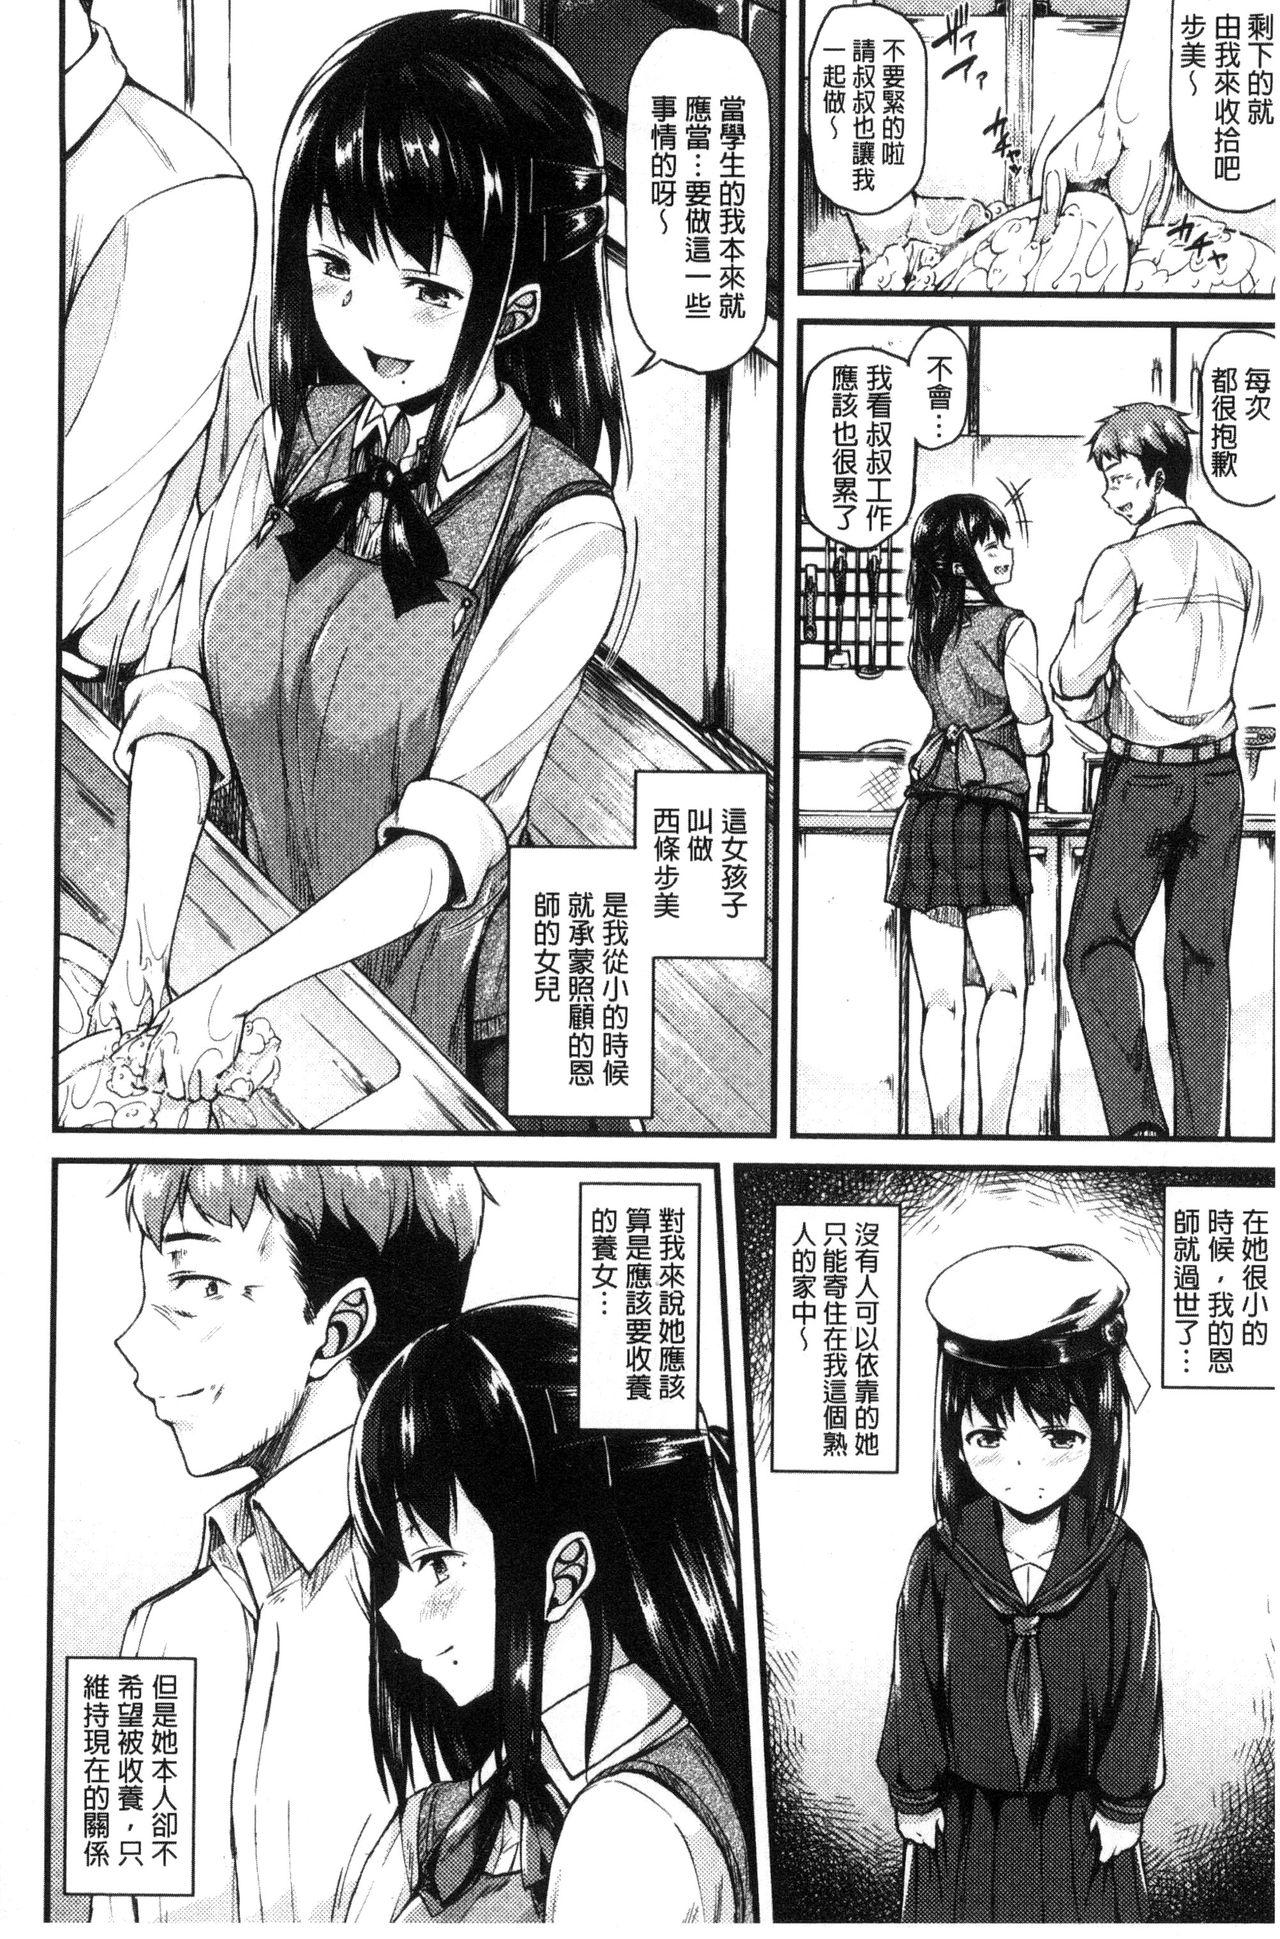 The Temple of the Devil (Comic Anchorage 029 September 2015) Chinese translation (25 pages)-第1章-图片69